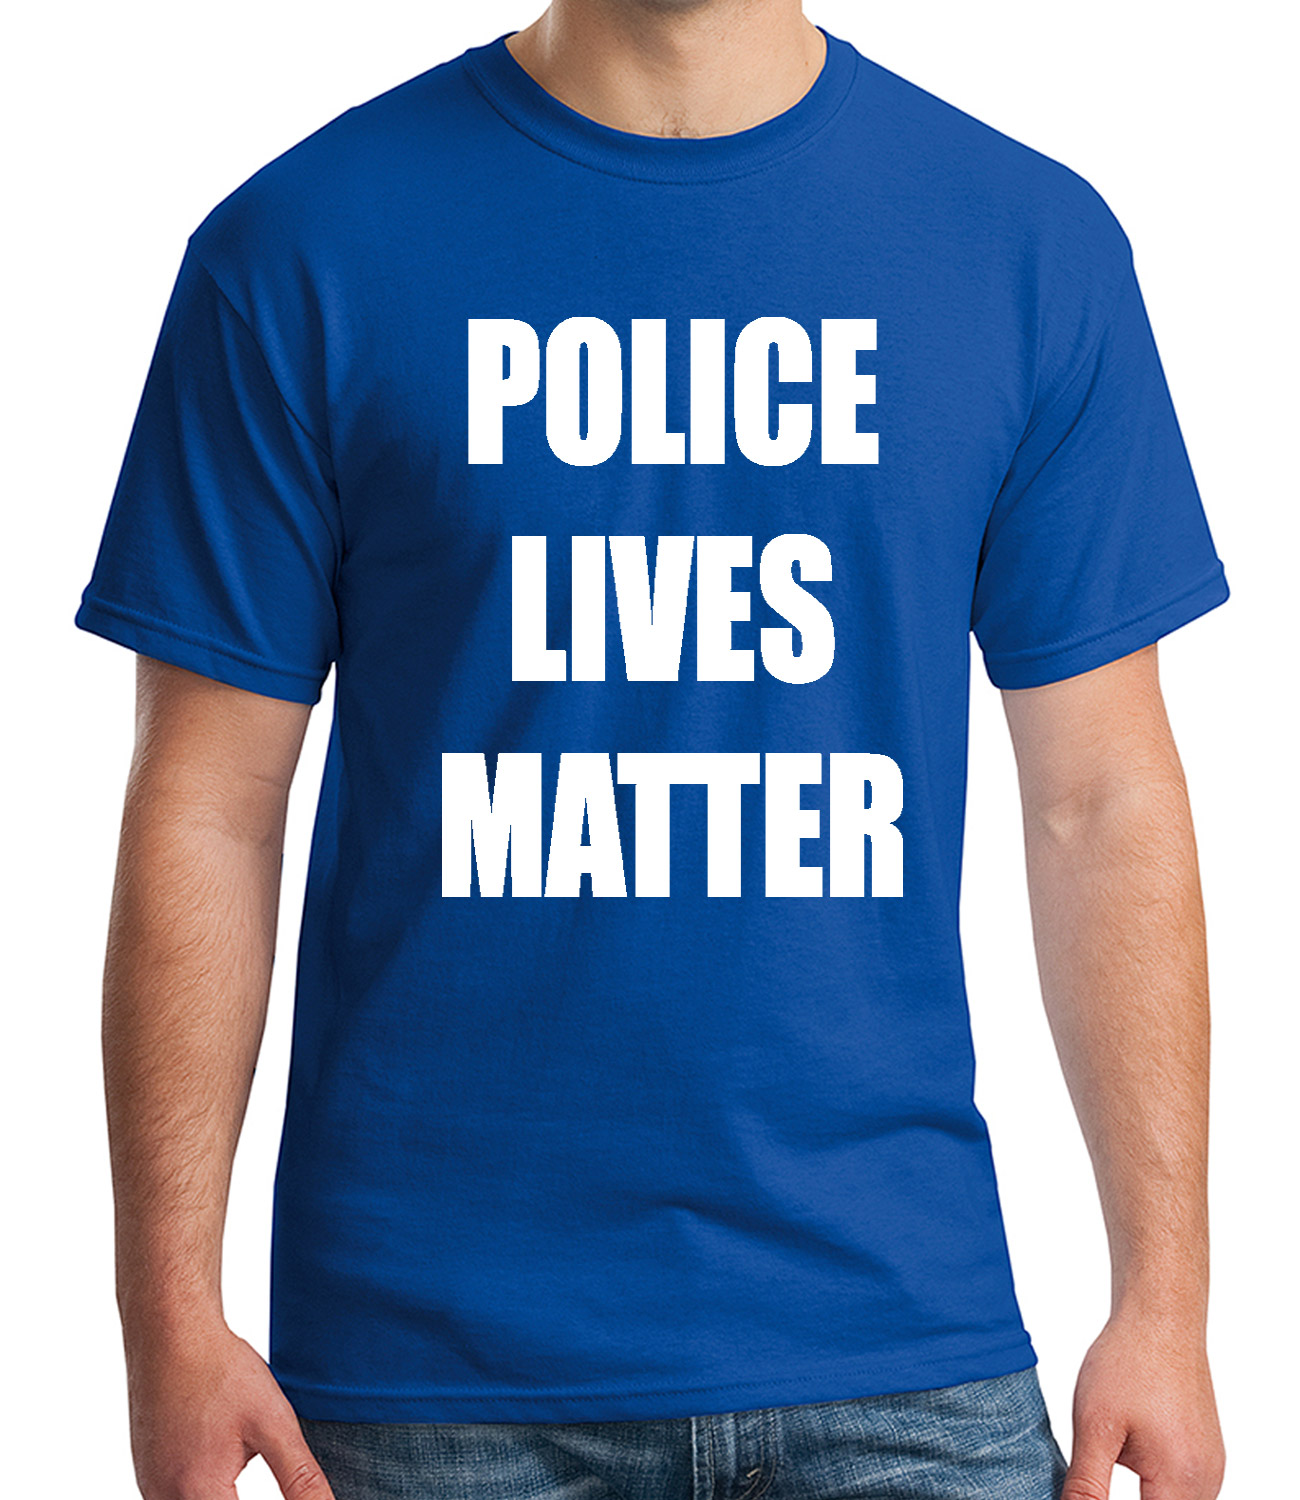 Cops Officer Lives Matter Adult's T-shirt US Police Support Tee for ...